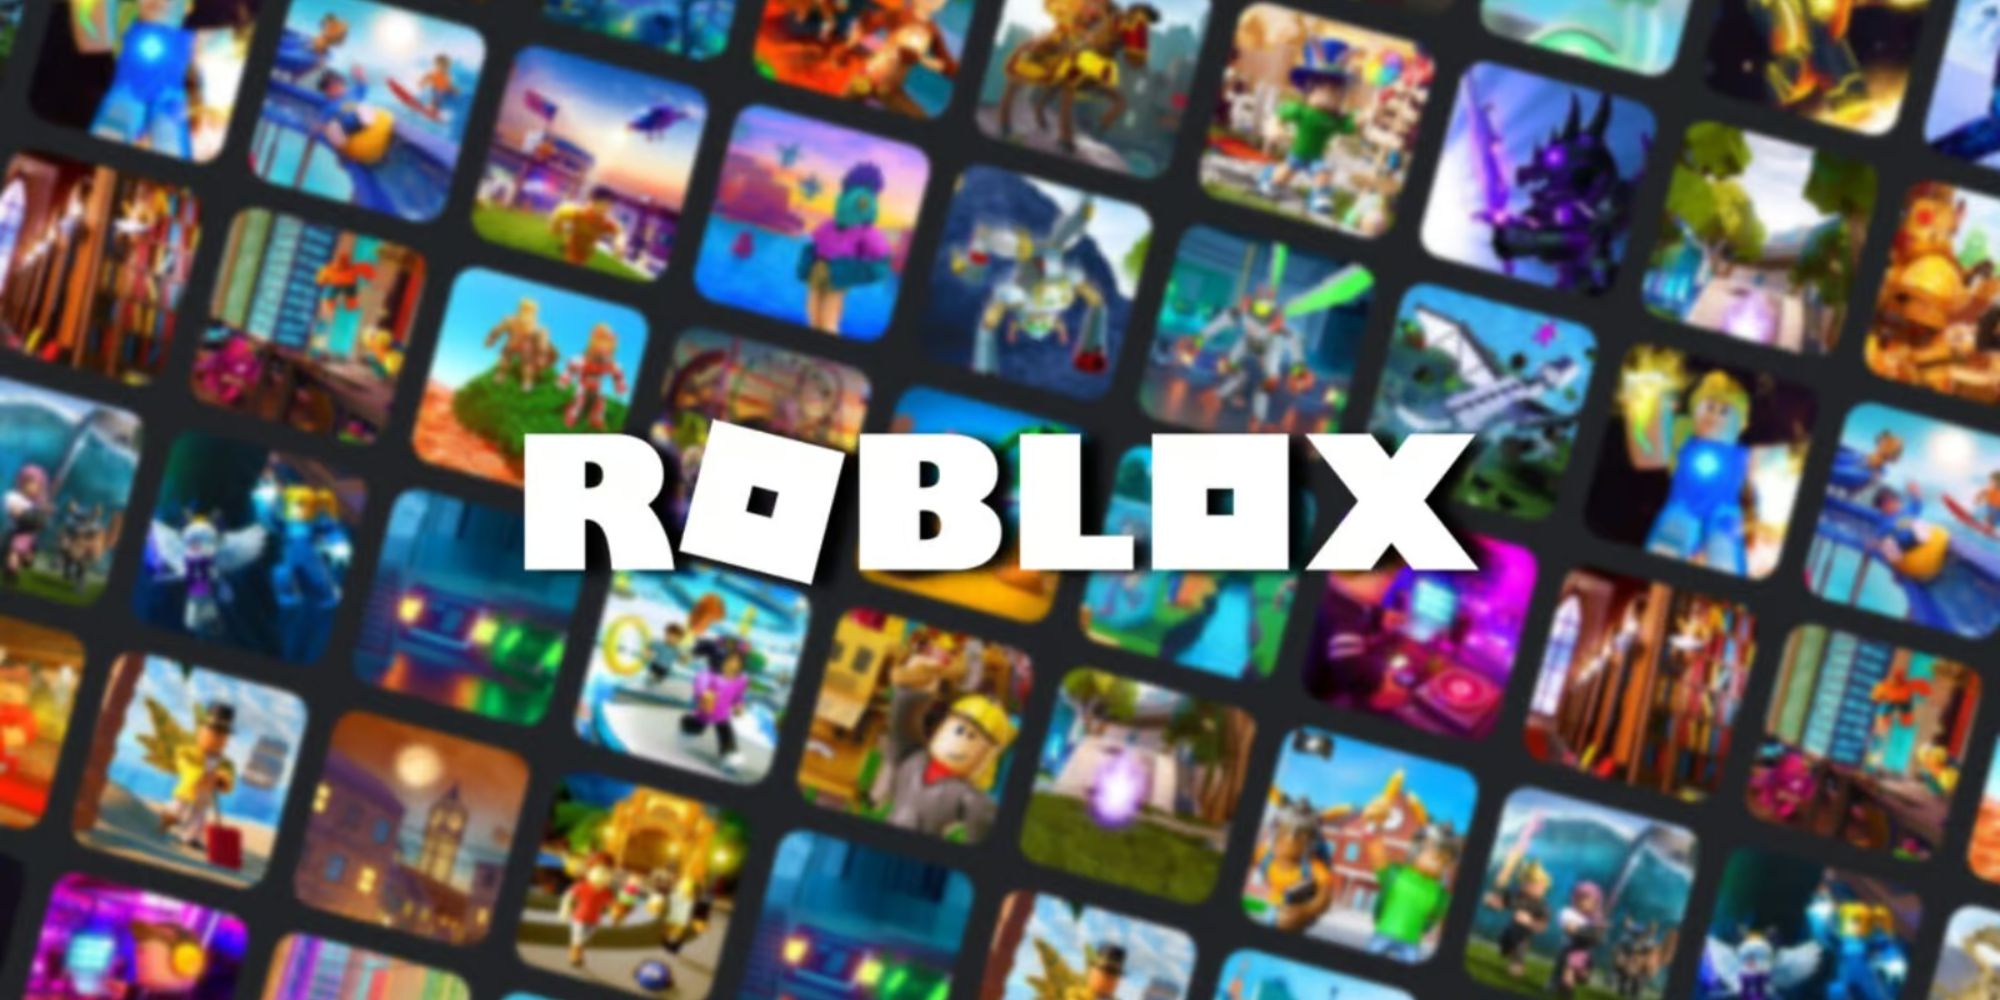 Roblox CEO says employees have to return to the office, or will be fired